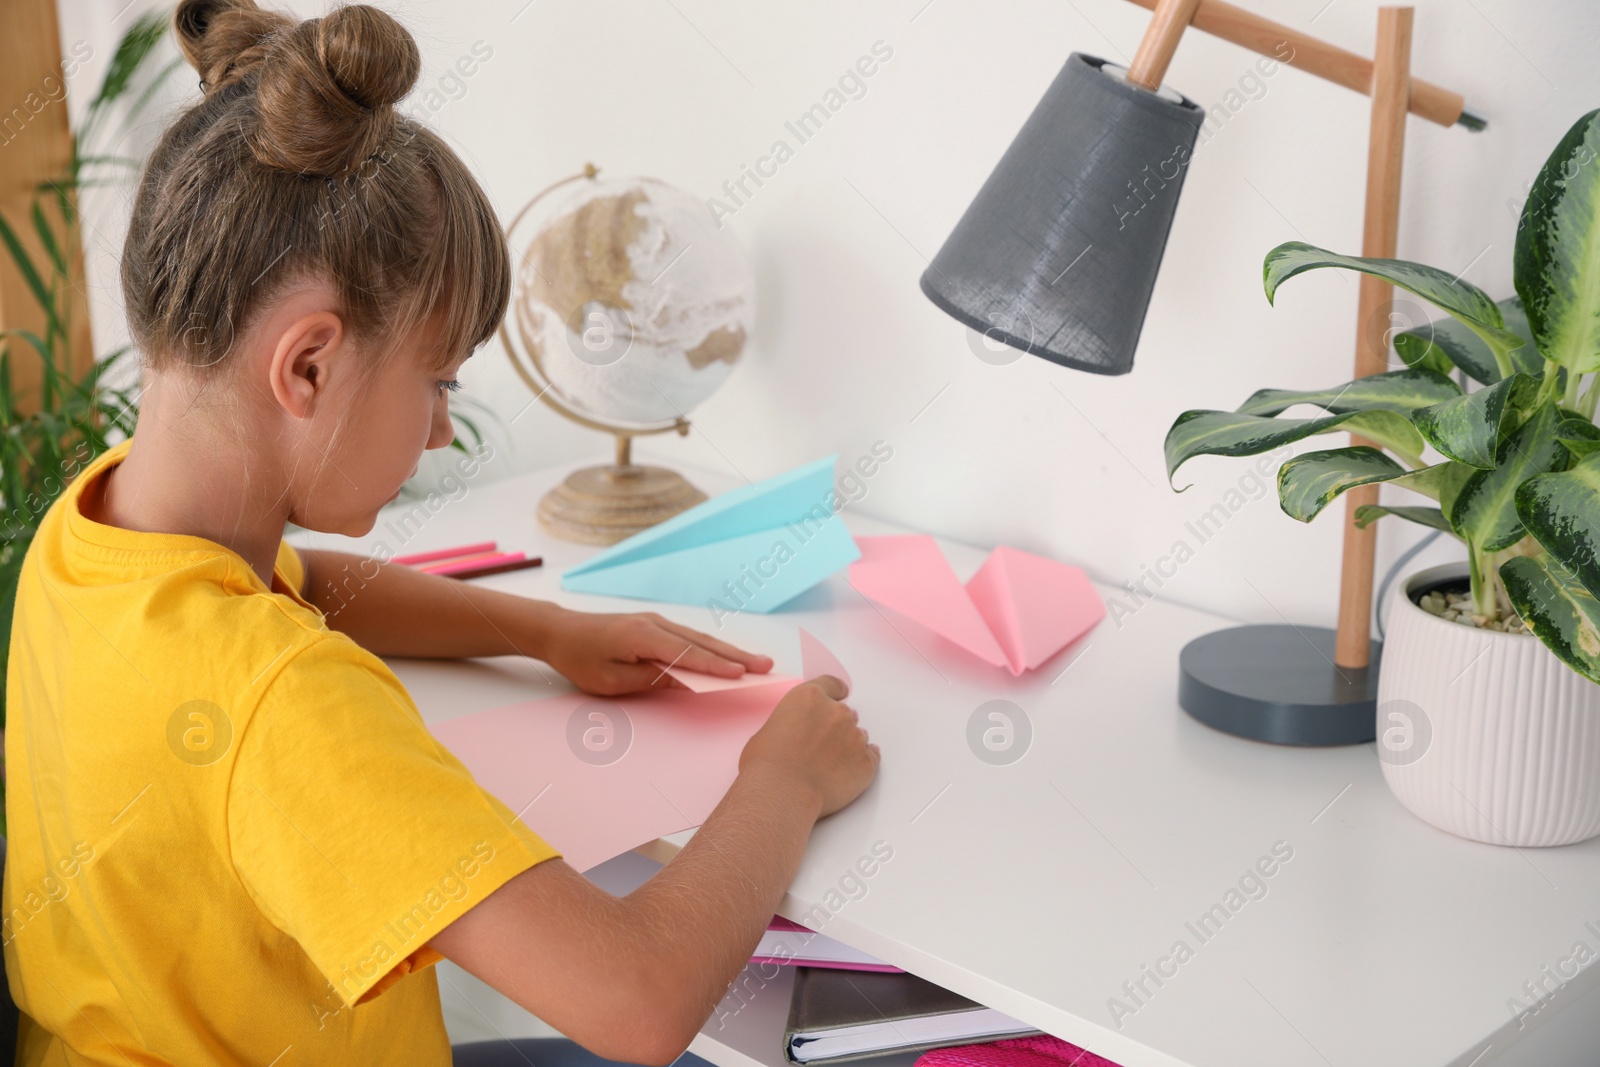 Photo of Cute little girl making paper plane at table in room